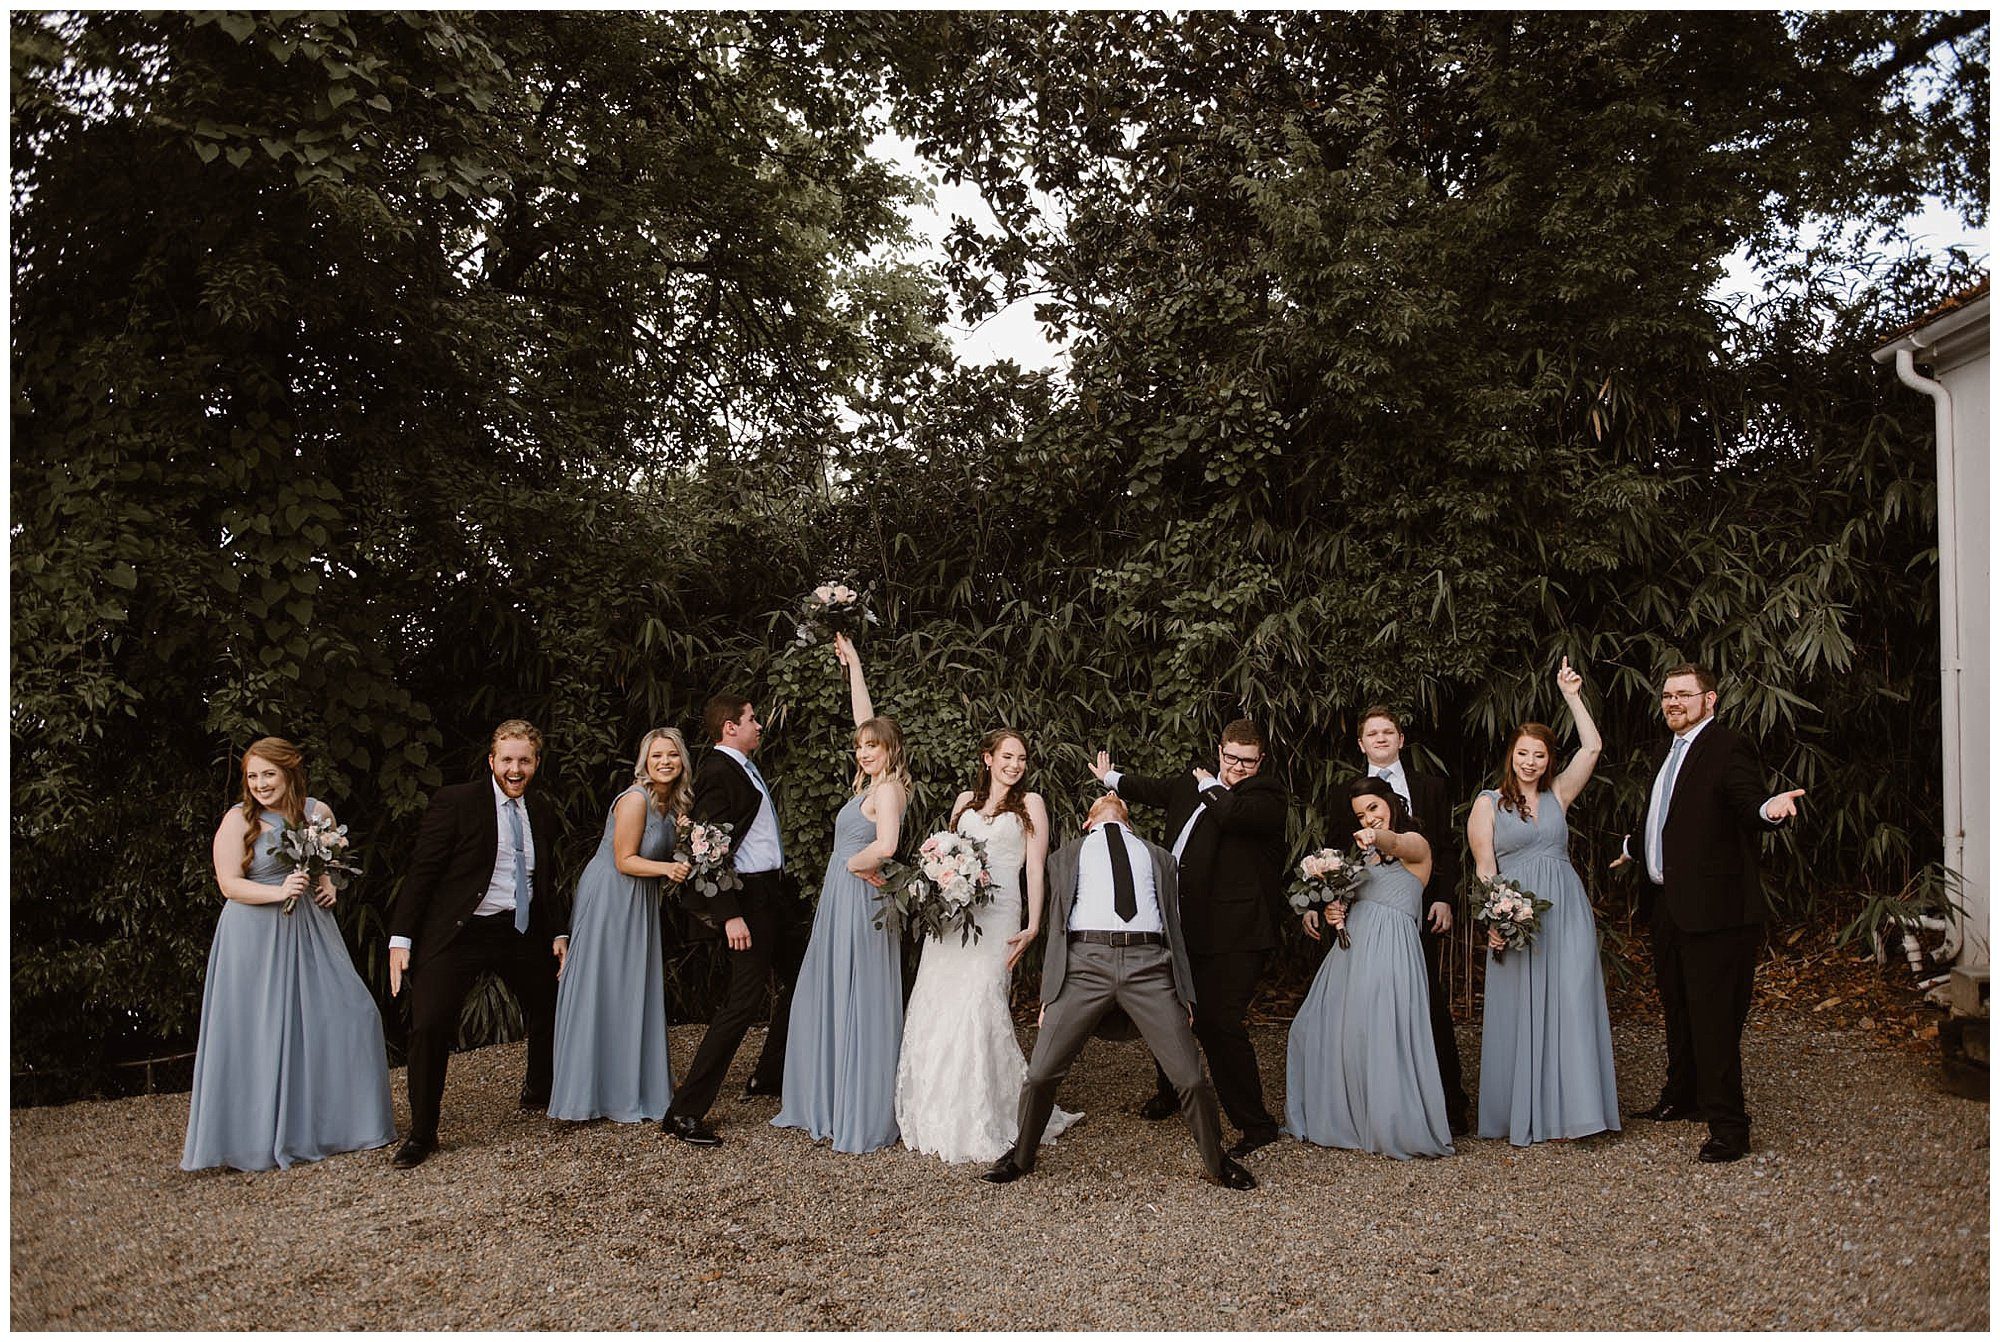 Bridal Party Photos at Crescent Bend House Knoxville